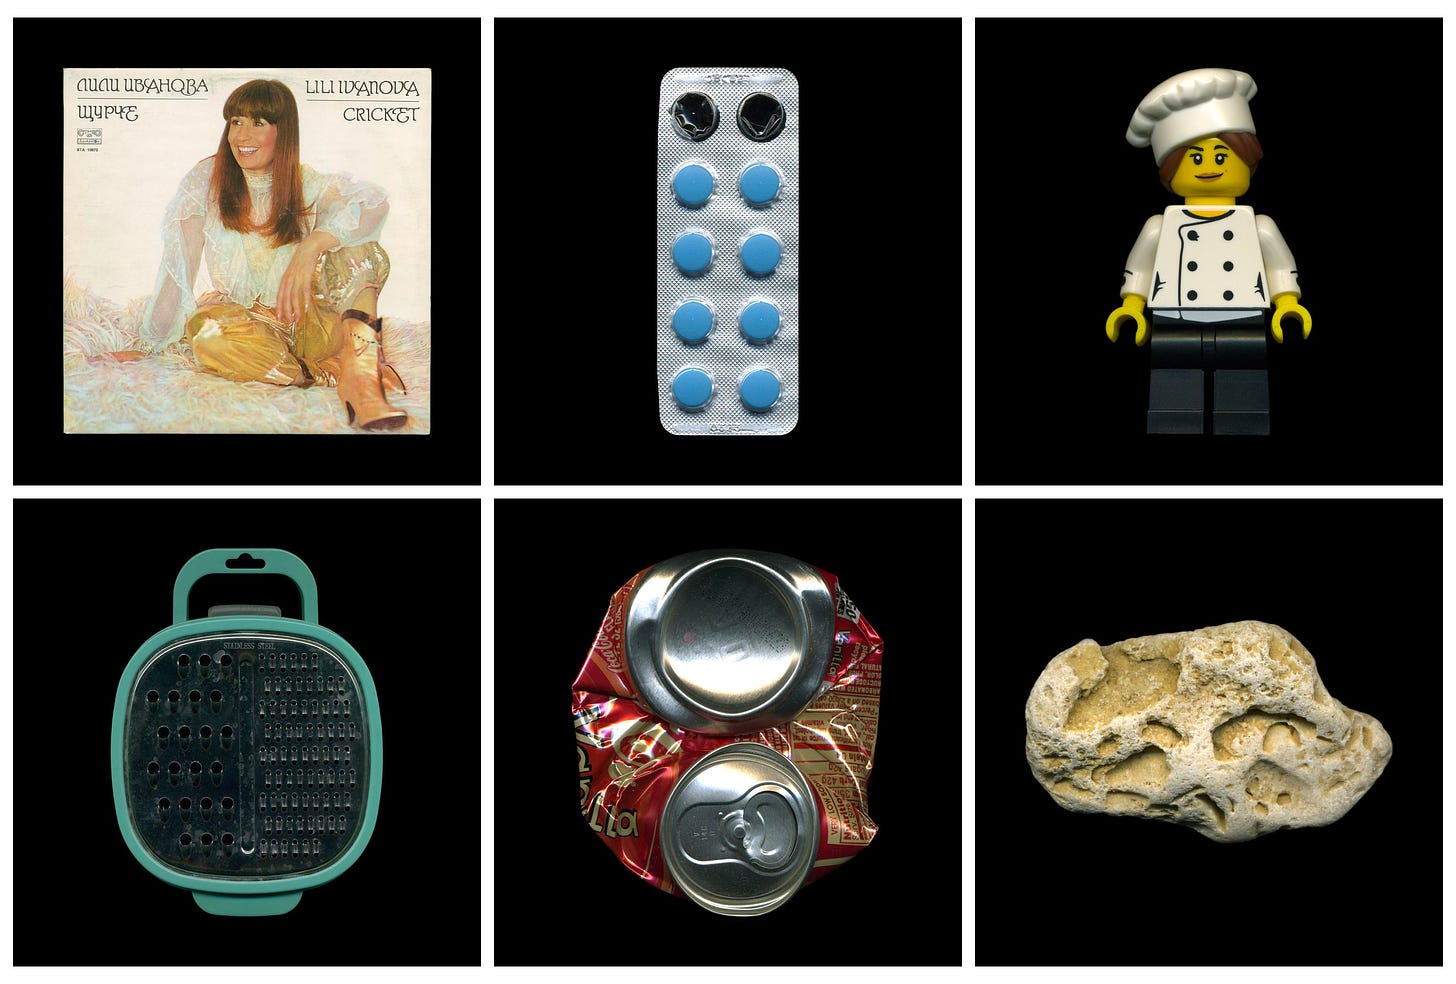 six scanned objects on black backgrounds. An album with a woman on the cover, a pack of pills, a lego person, a grater, a crushed can of soda, and a rock.